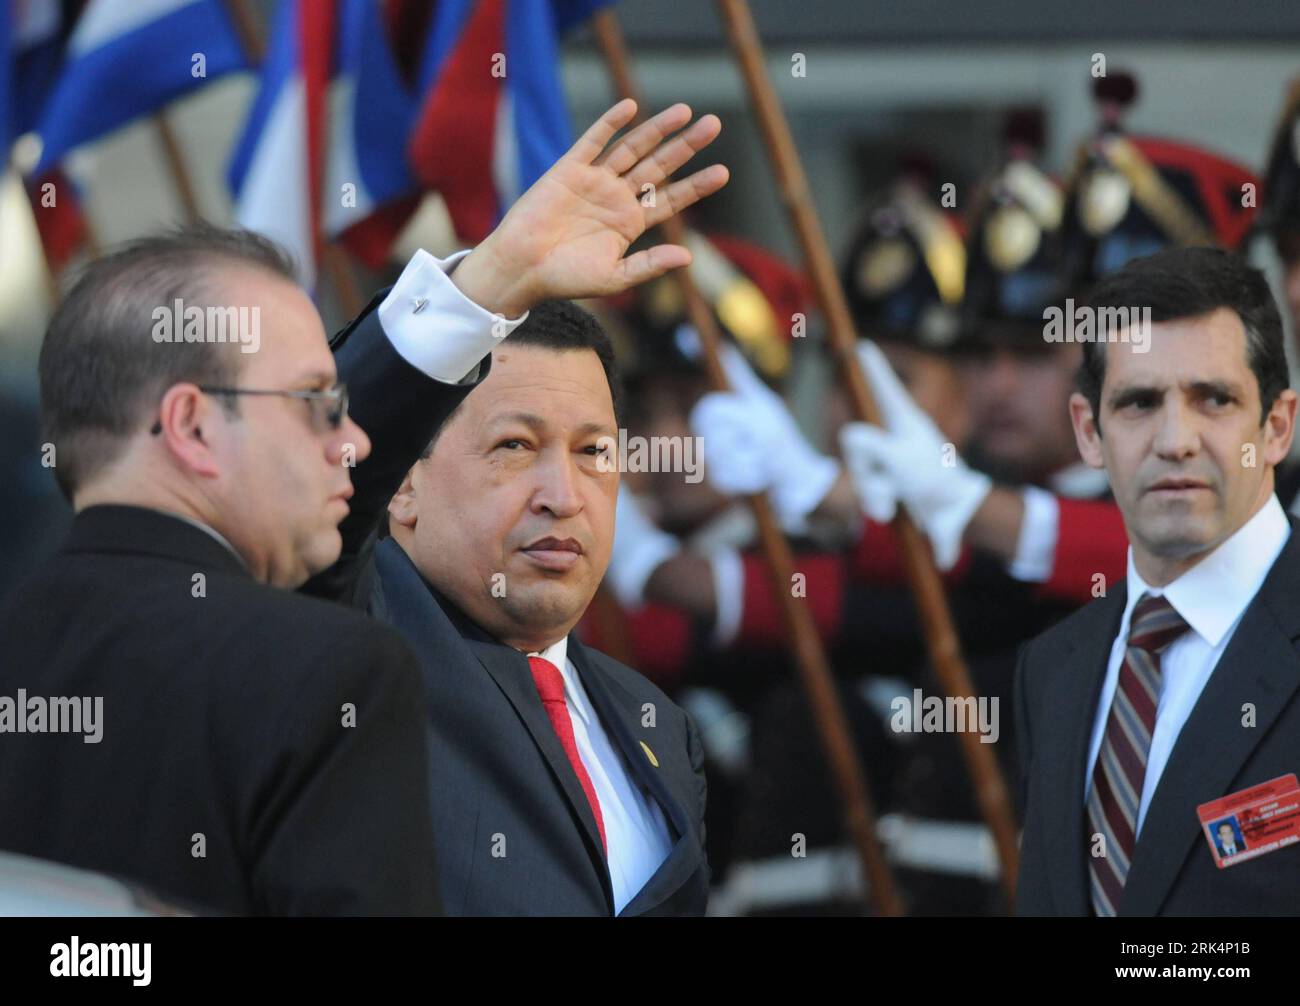 Bildnummer: 53655145  Datum: 08.12.2009  Copyright: imago/Xinhua (091209) -- MONTEVIDEO, Dec. 9, 2009 (Xinhua) -- Venezuelan President Hugo Chavez (C) waves to the crowd in Montevideo, Uruguay, Dec. 8, 2009. The Common Market of the South (Mercosur) summit finished Tuesday with few results achieved on regional trade issues but with vows to push for a free trade agreement with the European Union (EU). (Xinhua/Nicolas Celaya) (yc) (6)URUGUAY-MERCOSUR-SUMMIT PUBLICATIONxNOTxINxCHN People Politik premiumd kbdig xng 2009 quer     Bildnummer 53655145 Date 08 12 2009 Copyright Imago XINHUA  Montevide Stock Photo